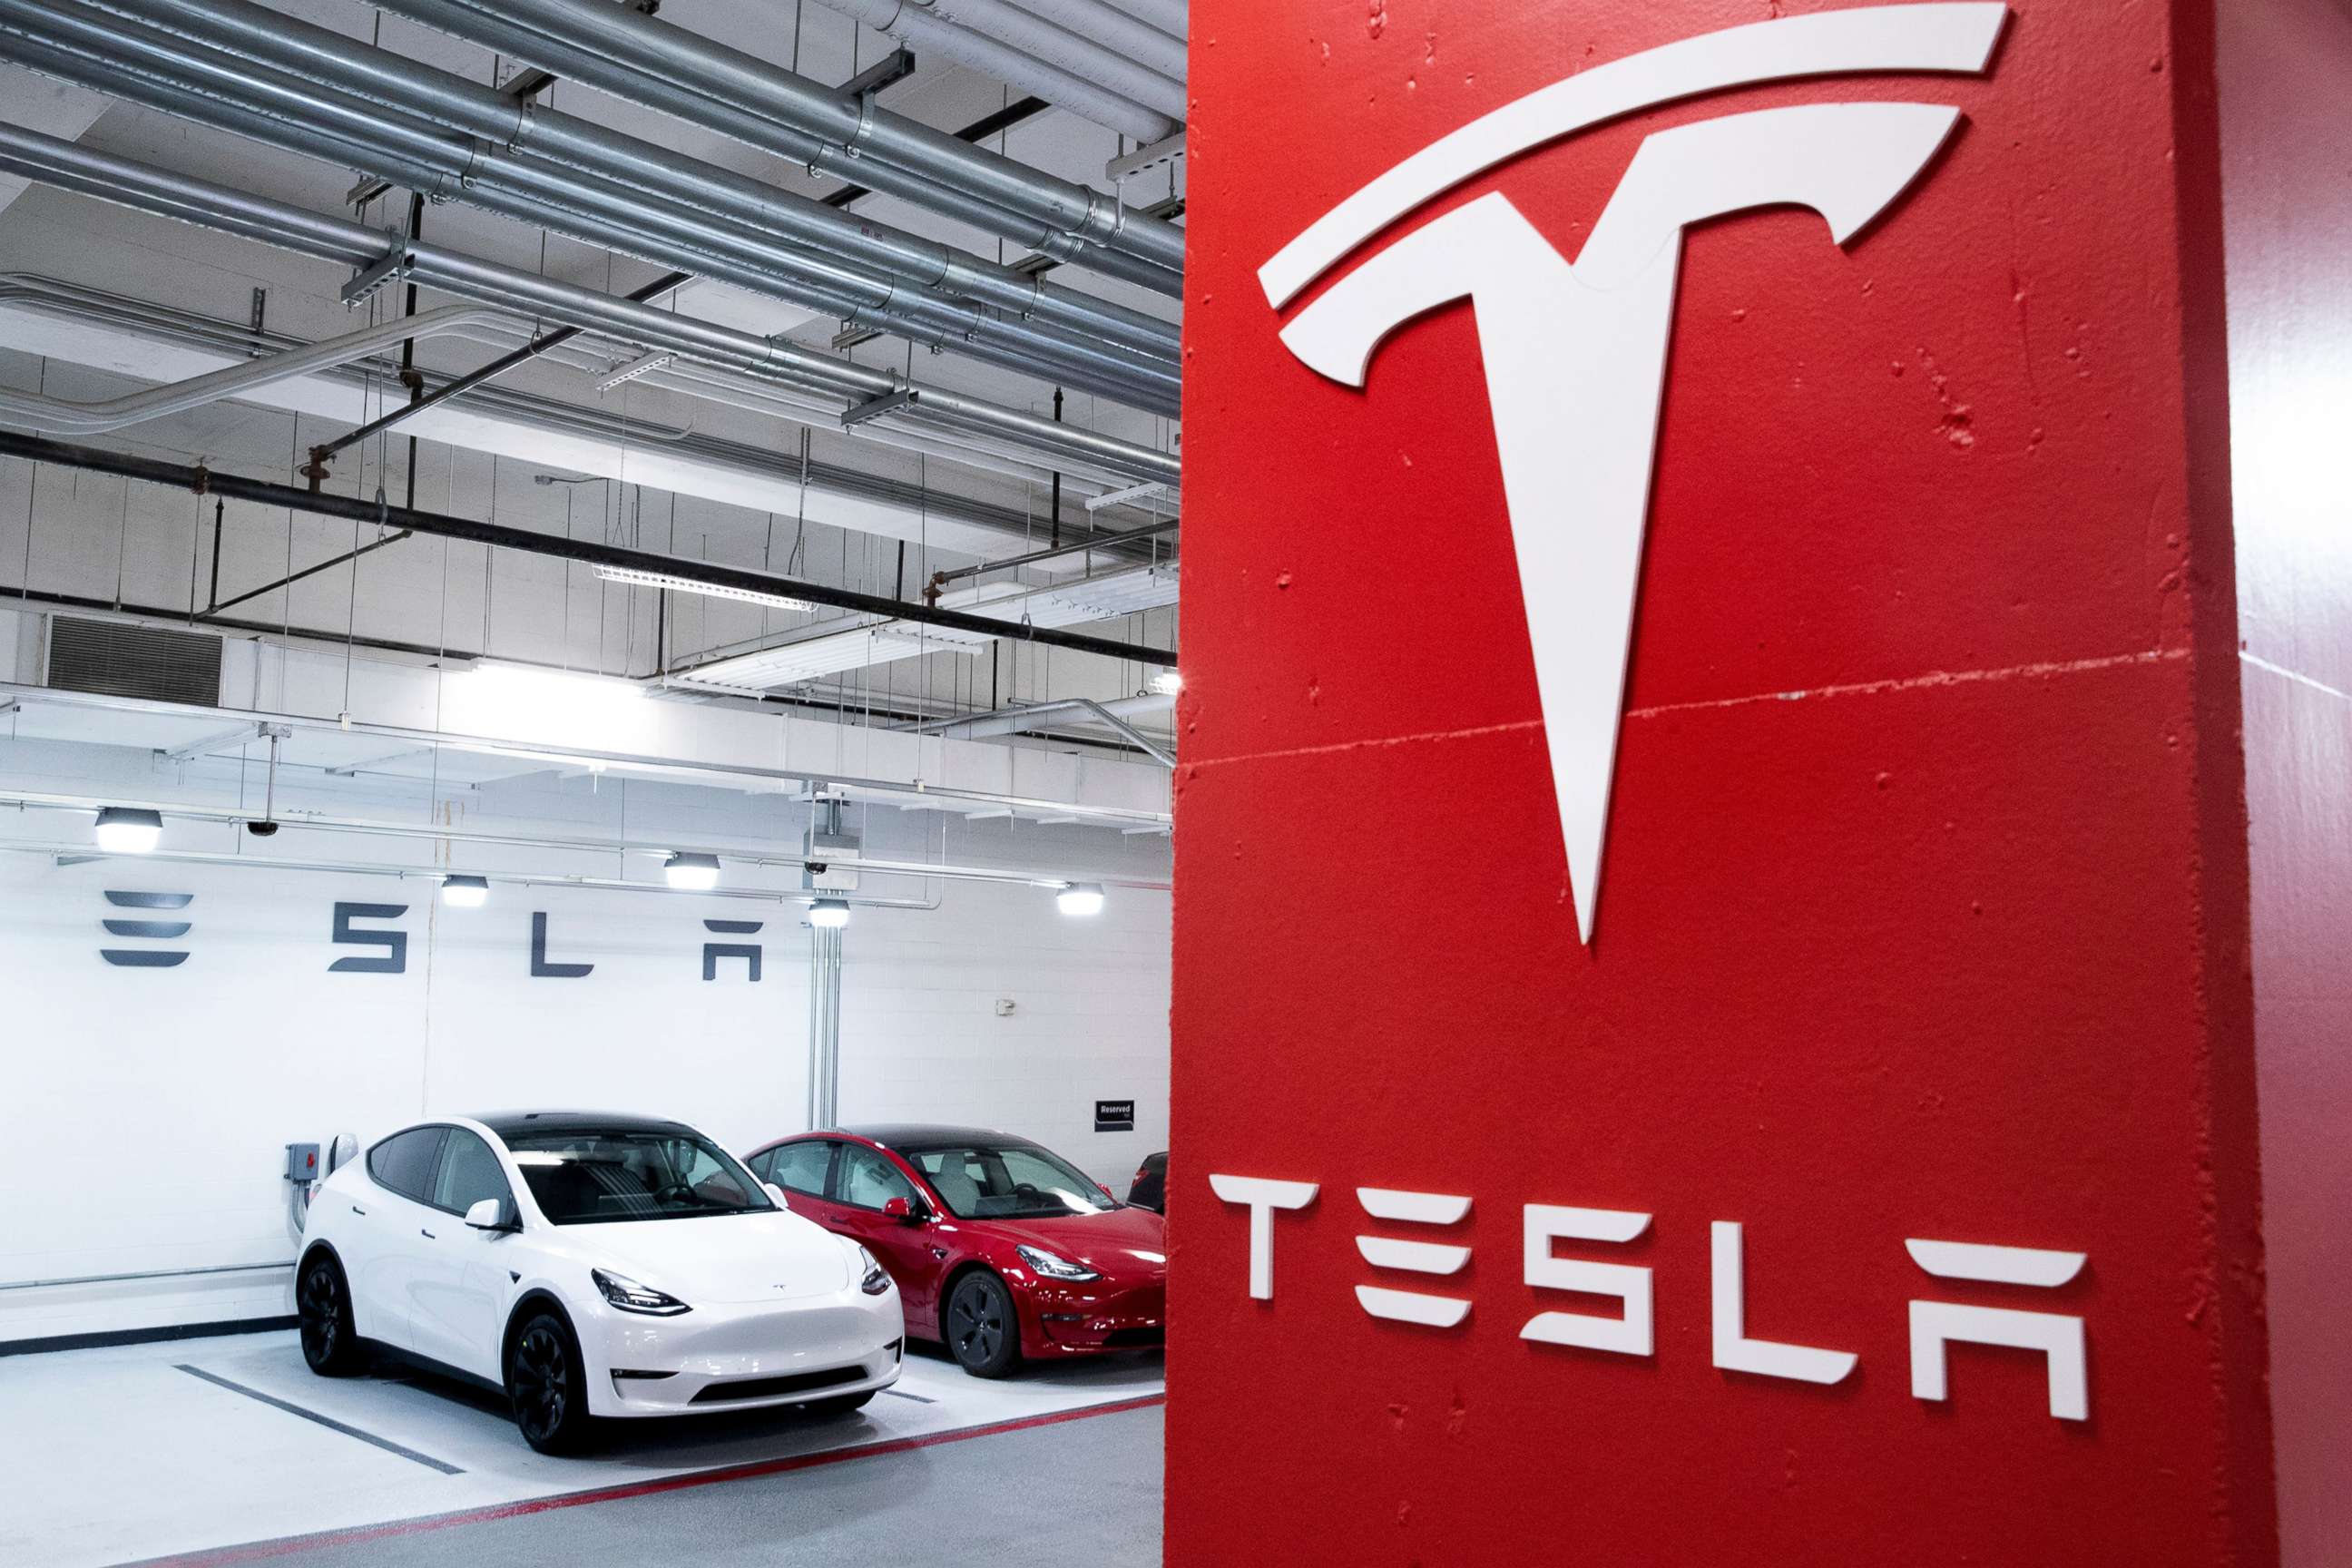 PHOTO: Tesla vehicles are seen charging in a garage in Washington, D.C., Feb. 8, 2021.